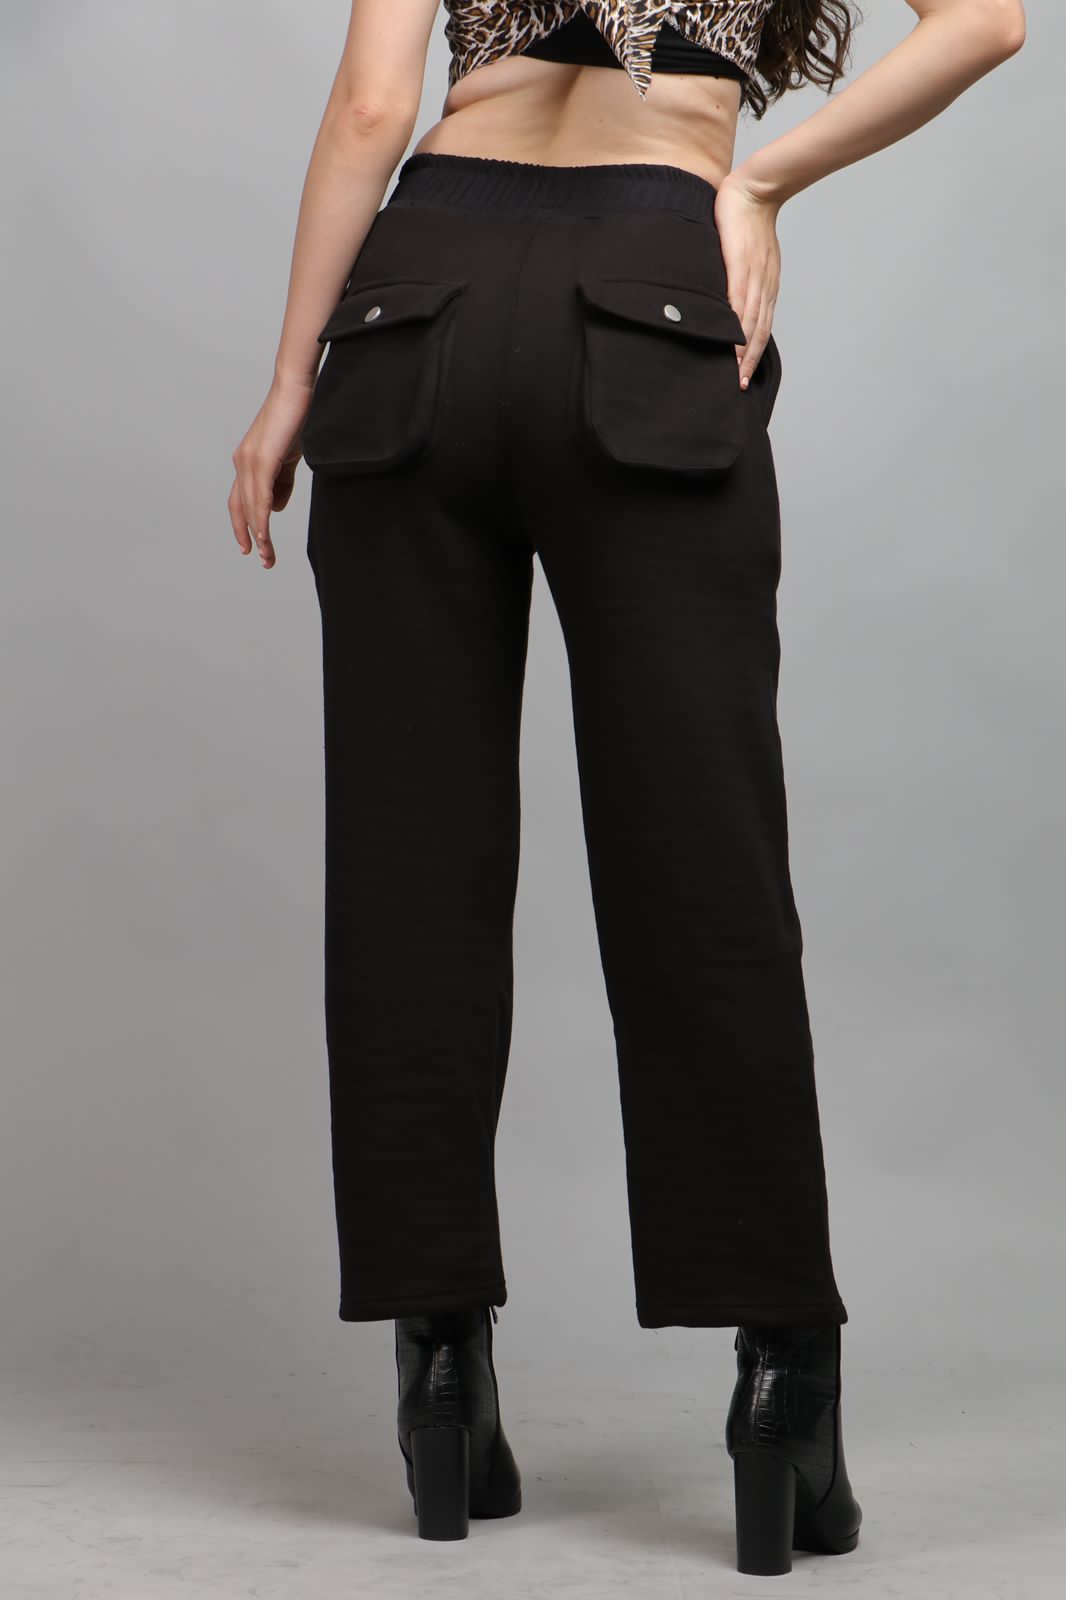 Miami Florida Trackpant - Embrace Comfort and Style!